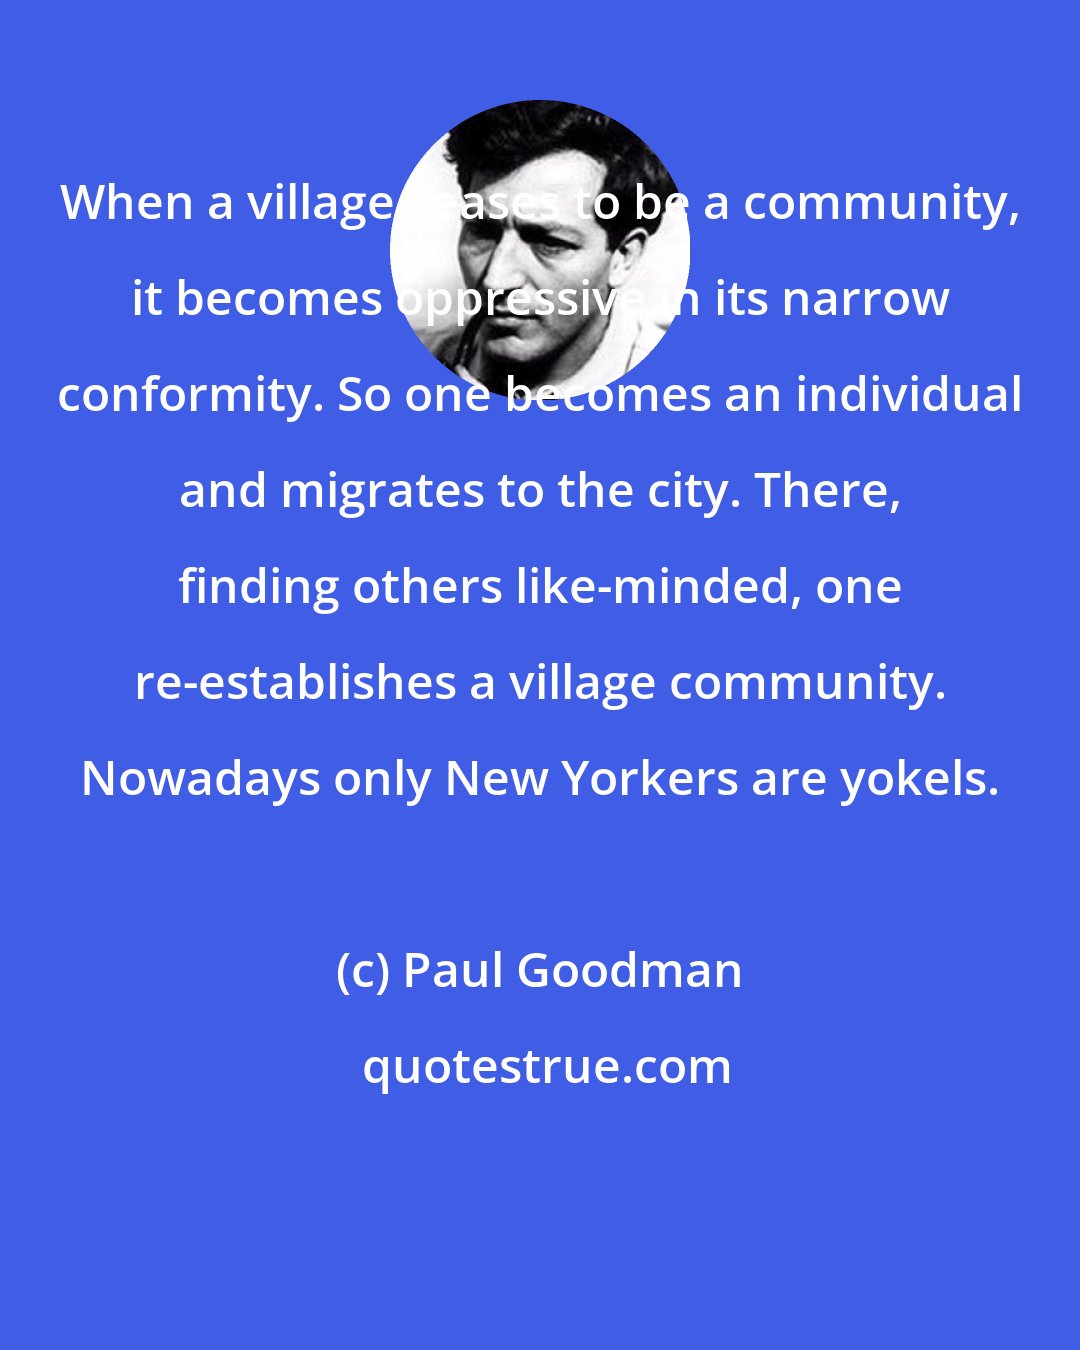 Paul Goodman: When a village ceases to be a community, it becomes oppressive in its narrow conformity. So one becomes an individual and migrates to the city. There, finding others like-minded, one re-establishes a village community. Nowadays only New Yorkers are yokels.